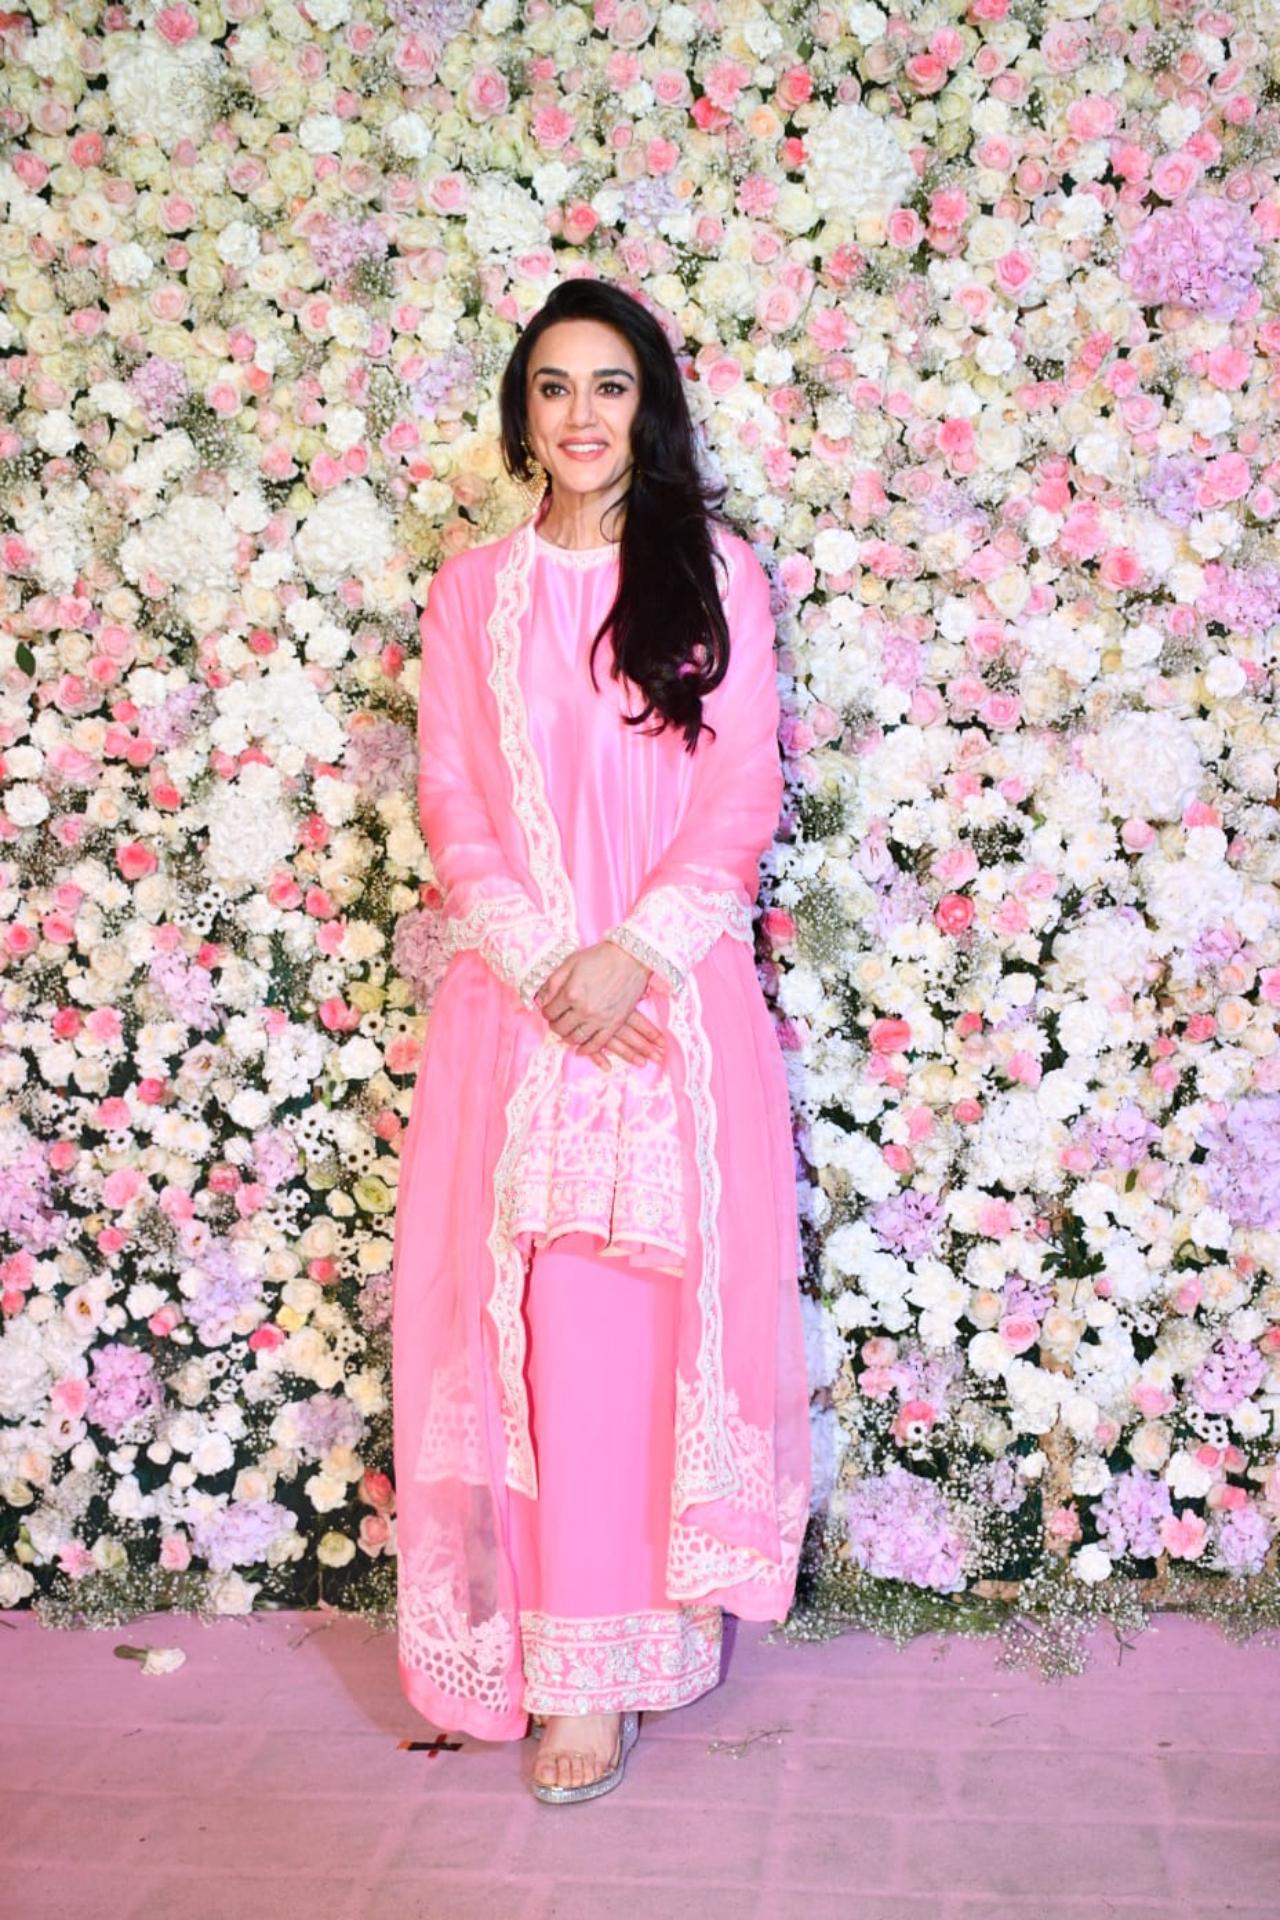 Preity Zinta looked stunning as ever in a pink Indian attire